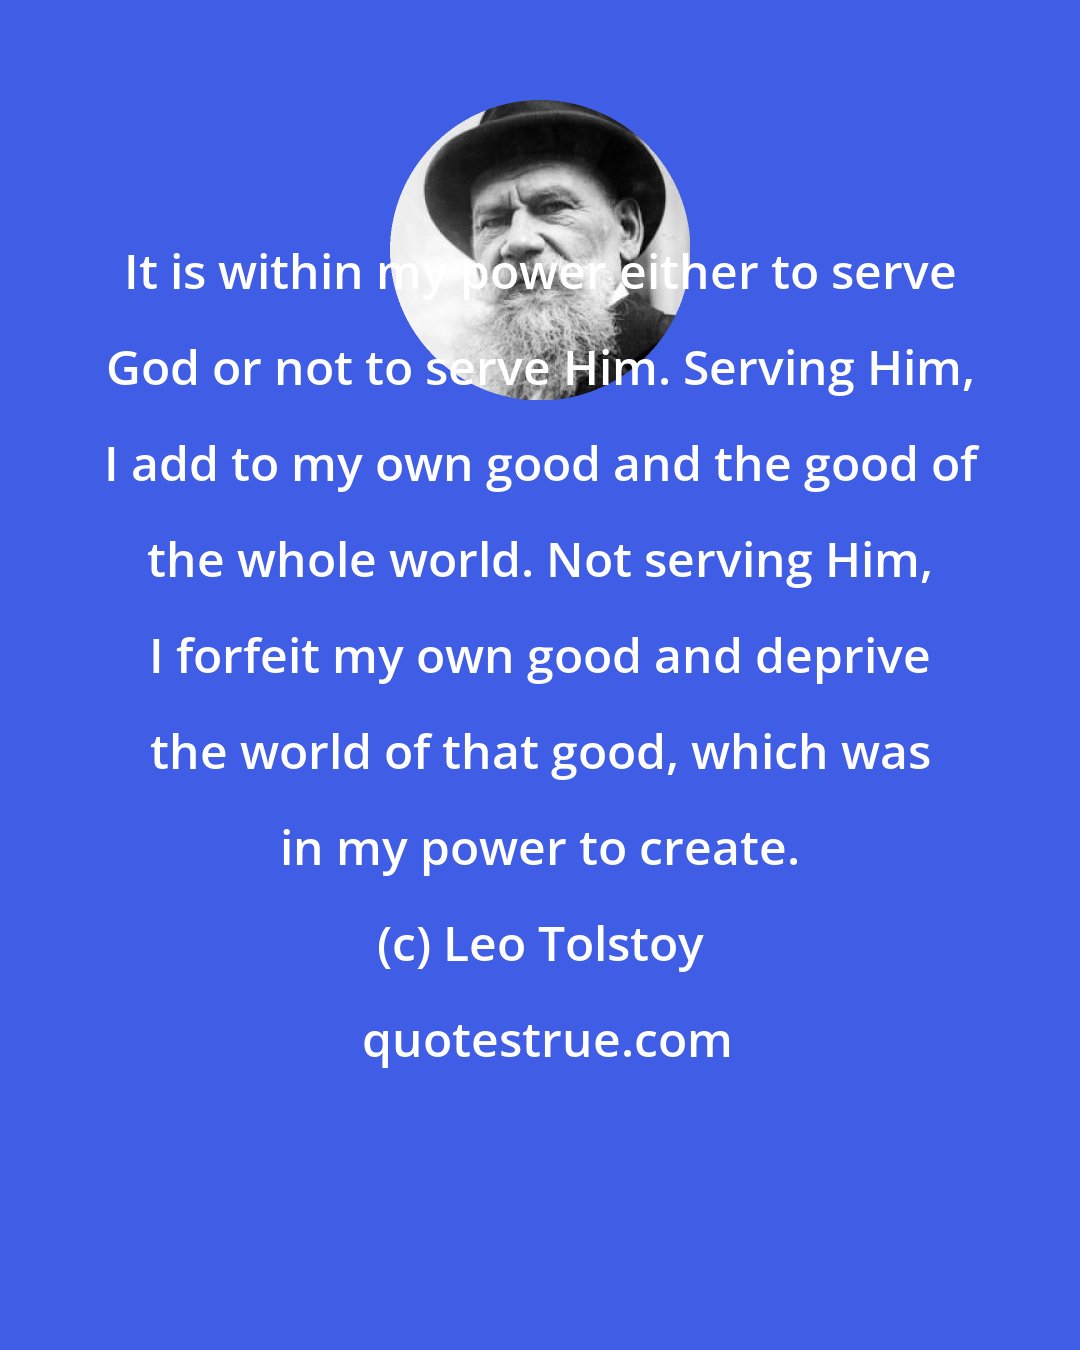 Leo Tolstoy: It is within my power either to serve God or not to serve Him. Serving Him, I add to my own good and the good of the whole world. Not serving Him, I forfeit my own good and deprive the world of that good, which was in my power to create.